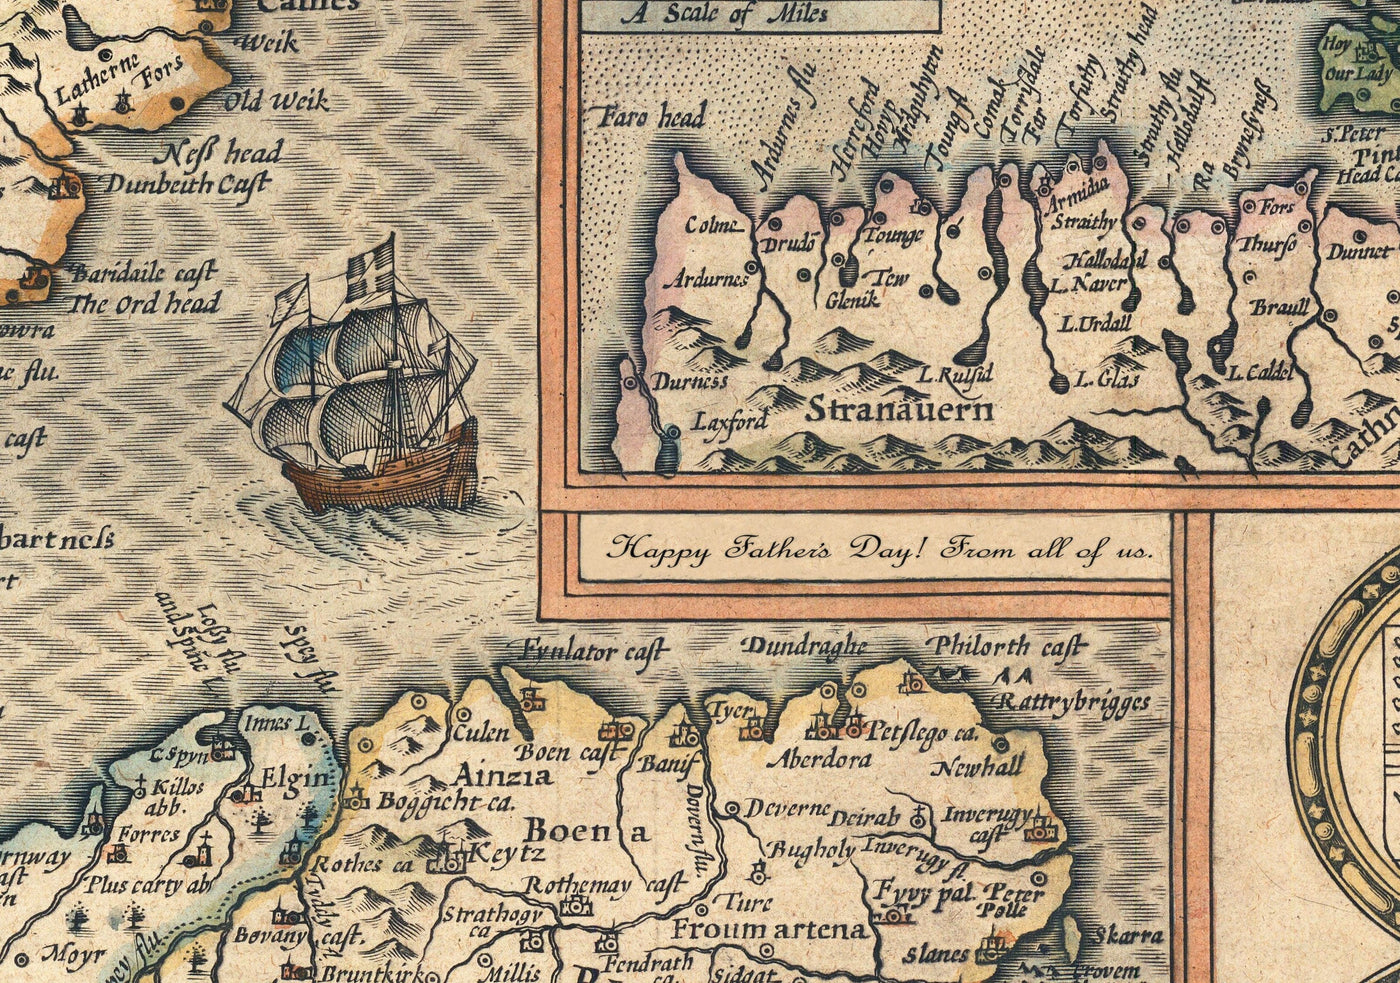 Old Map of Channel Isles, 1611 by John Speed - Jersey, Guernsey, Farne Islands, Holy Island